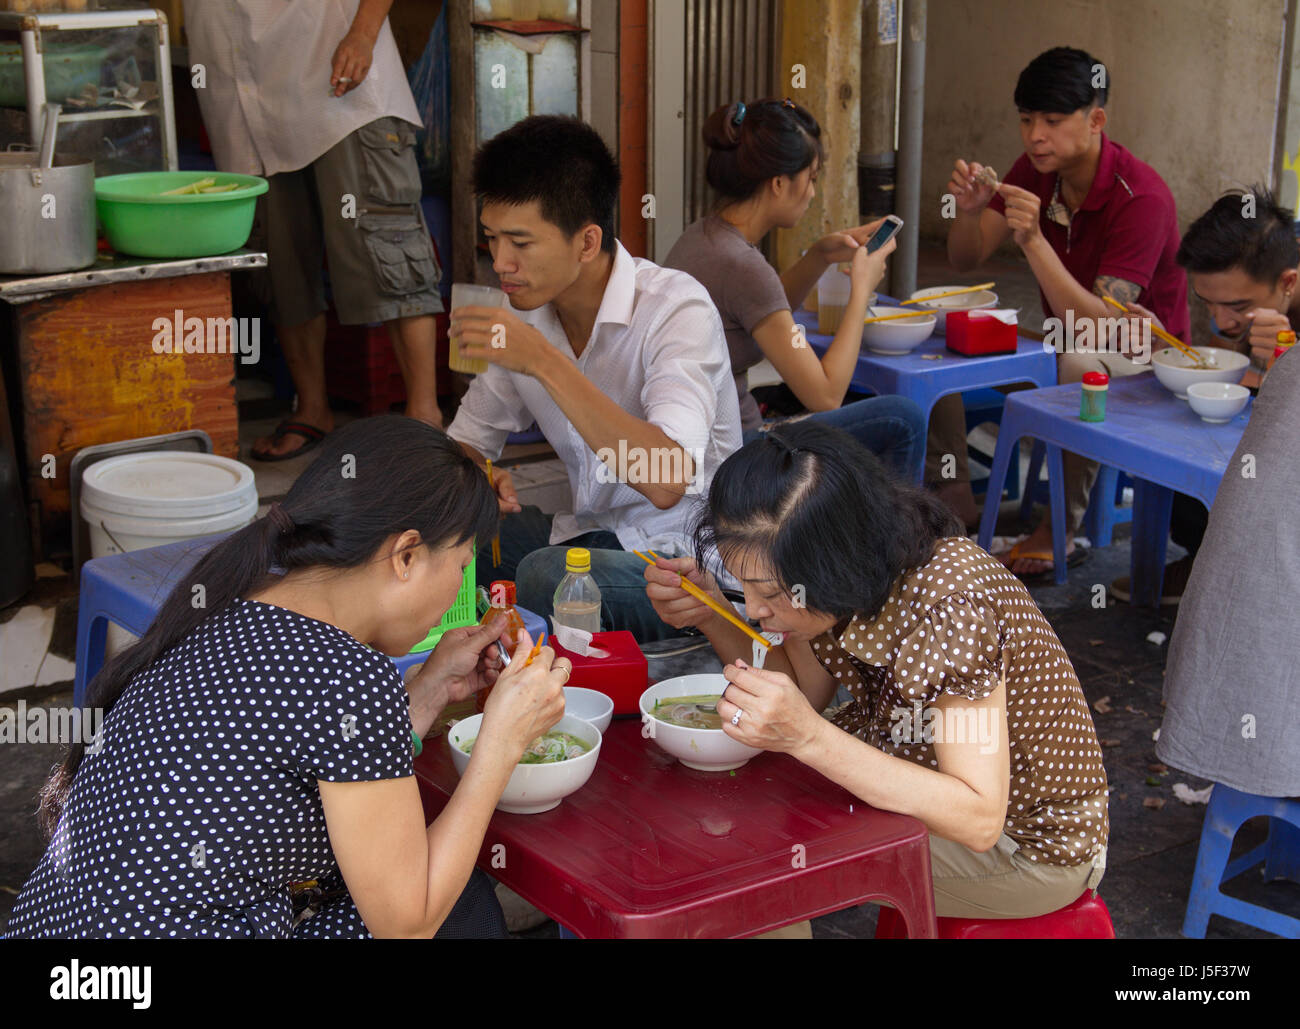 People eating noodles at sidewalk tables in the Old Quarter, Hanoi, Vietnam Stock Photo